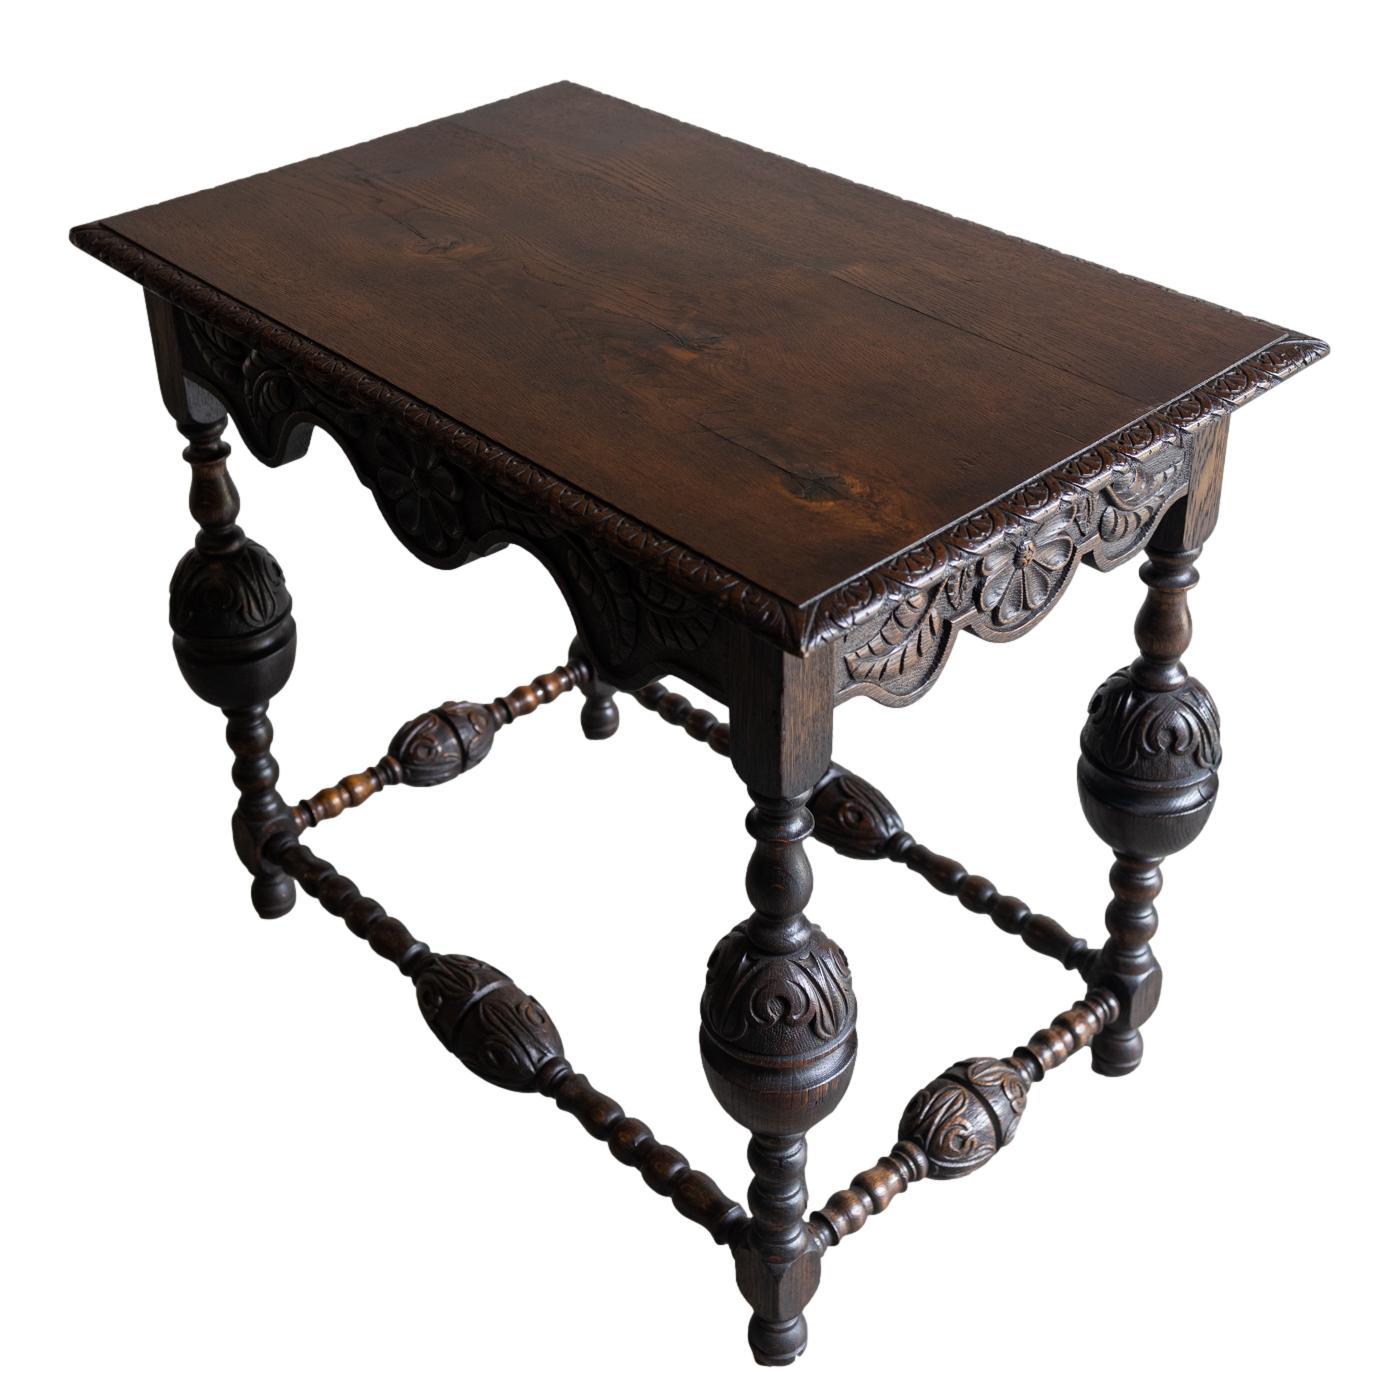 Hand-Carved A Tudor-Style Carved Oak Center Table with Daisy Medallions, English, ca. 1880 For Sale